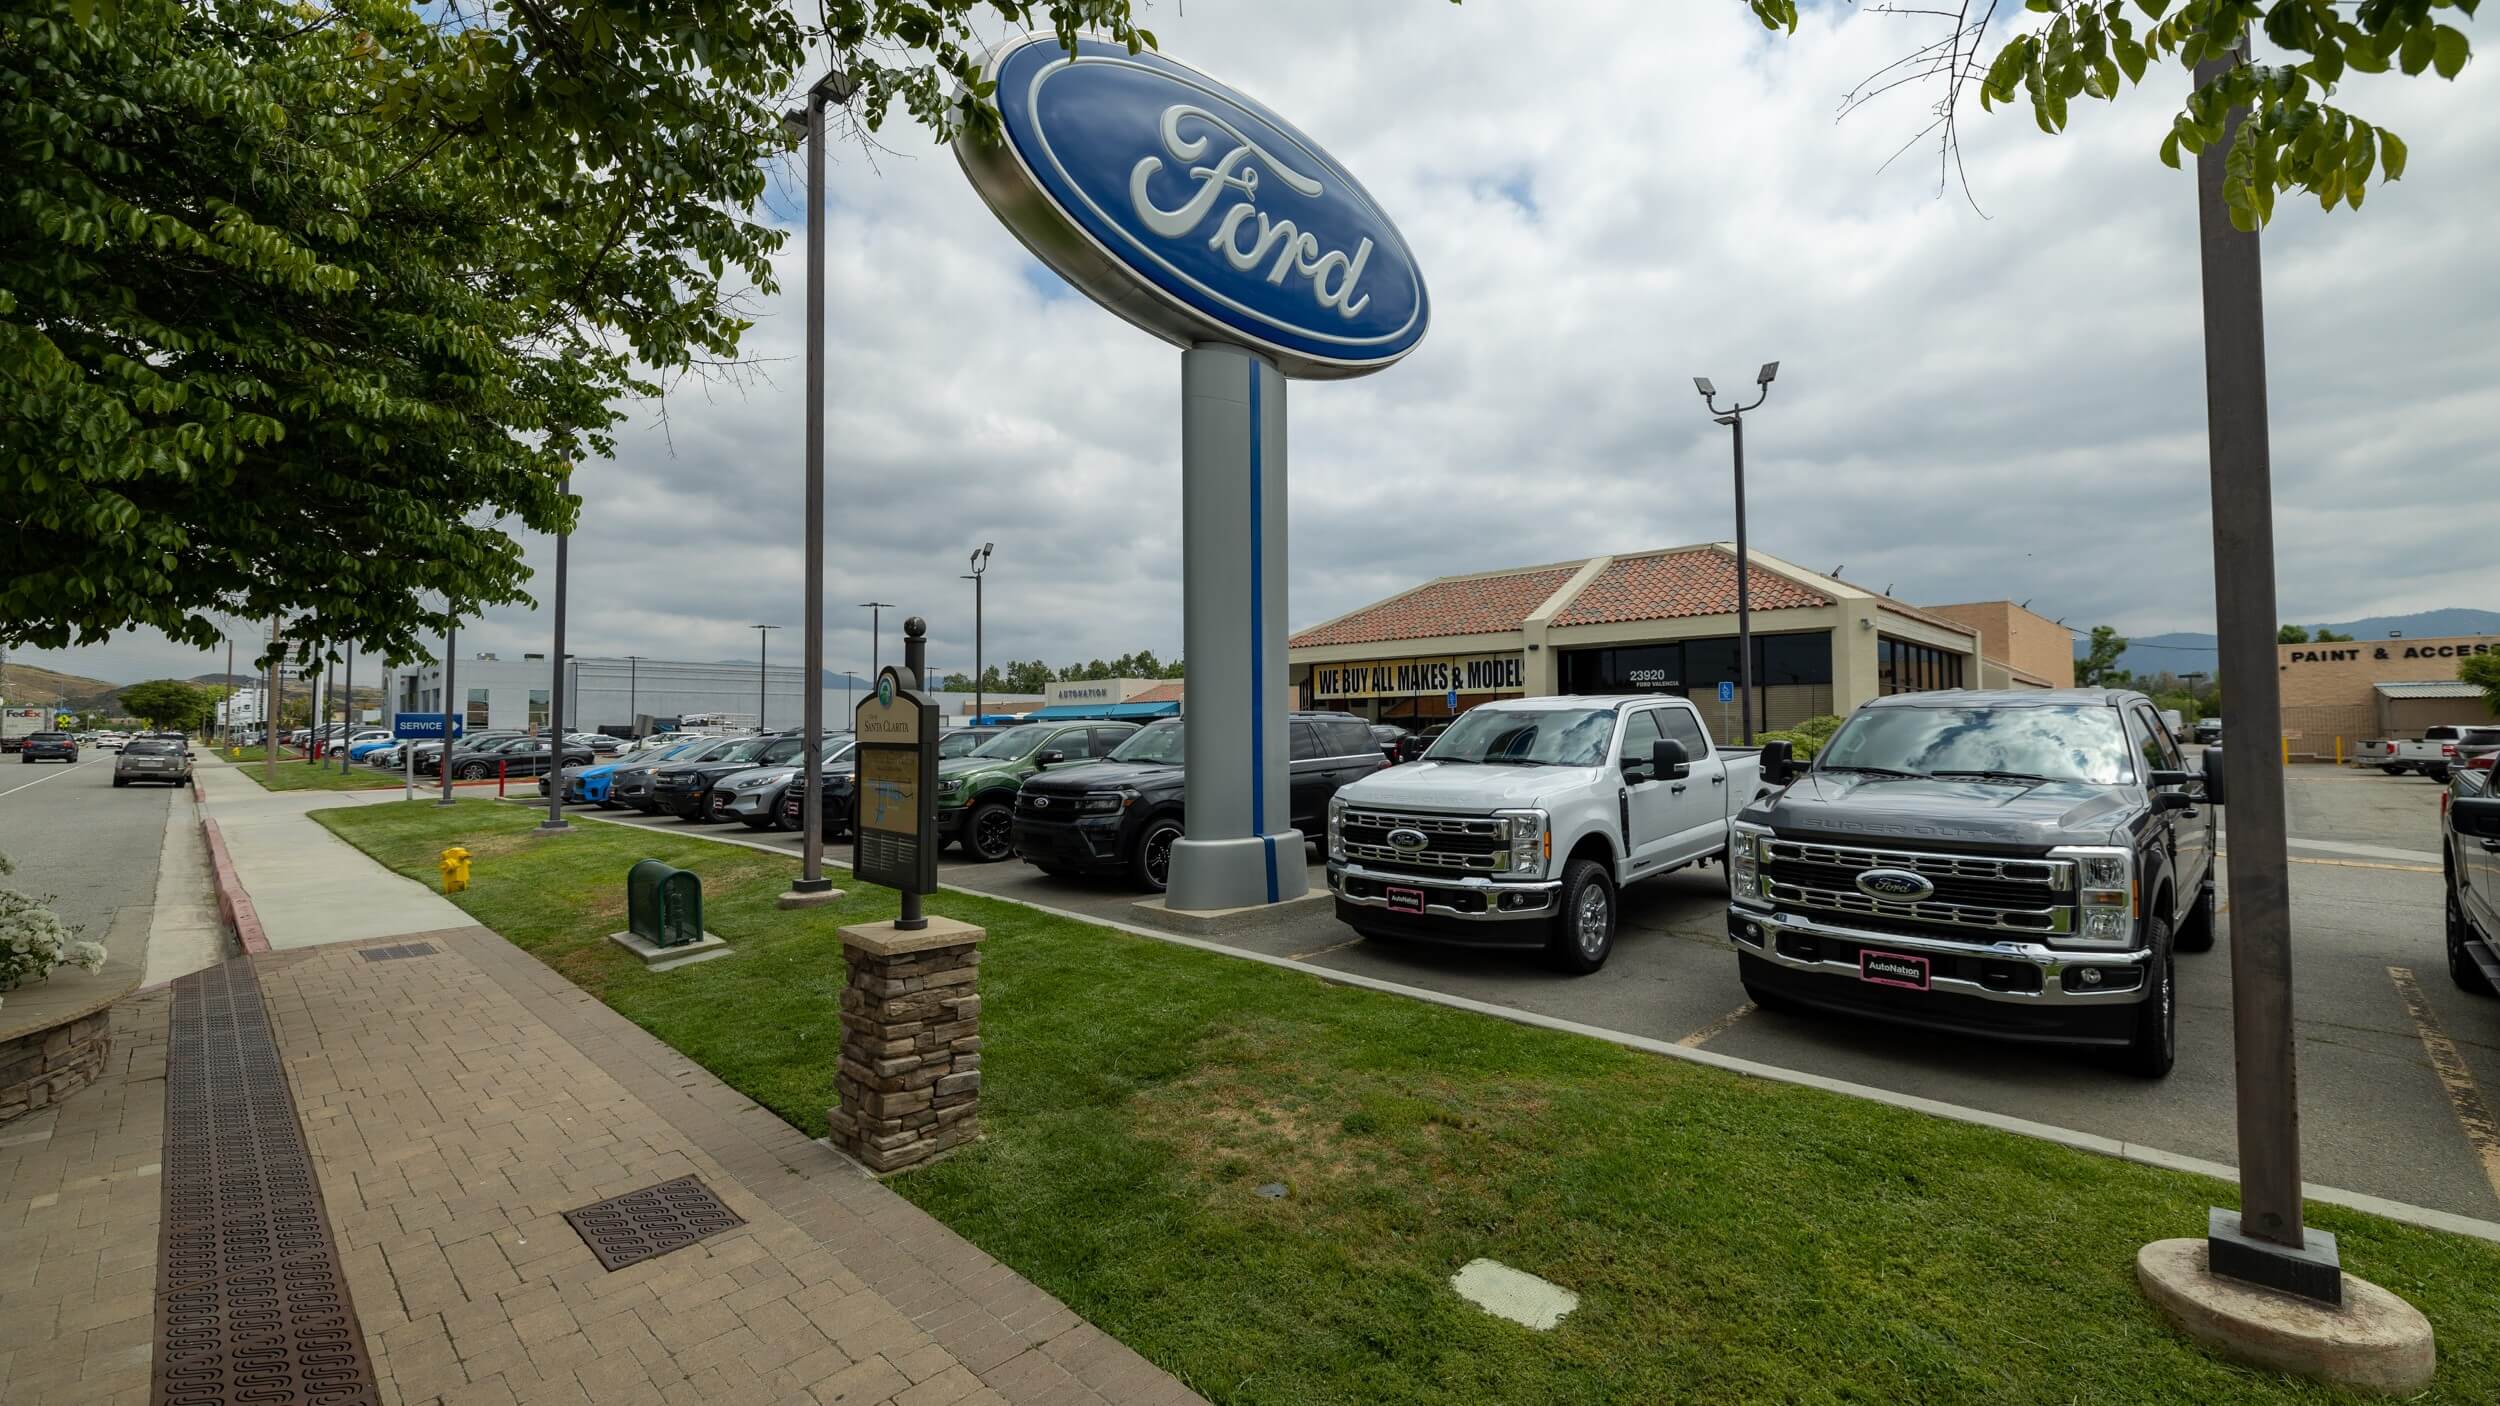 Exterior view of the AutoNation Ford dealership in Valencia, CA, trucks are parked under a Ford sign, shot from the sidewalk